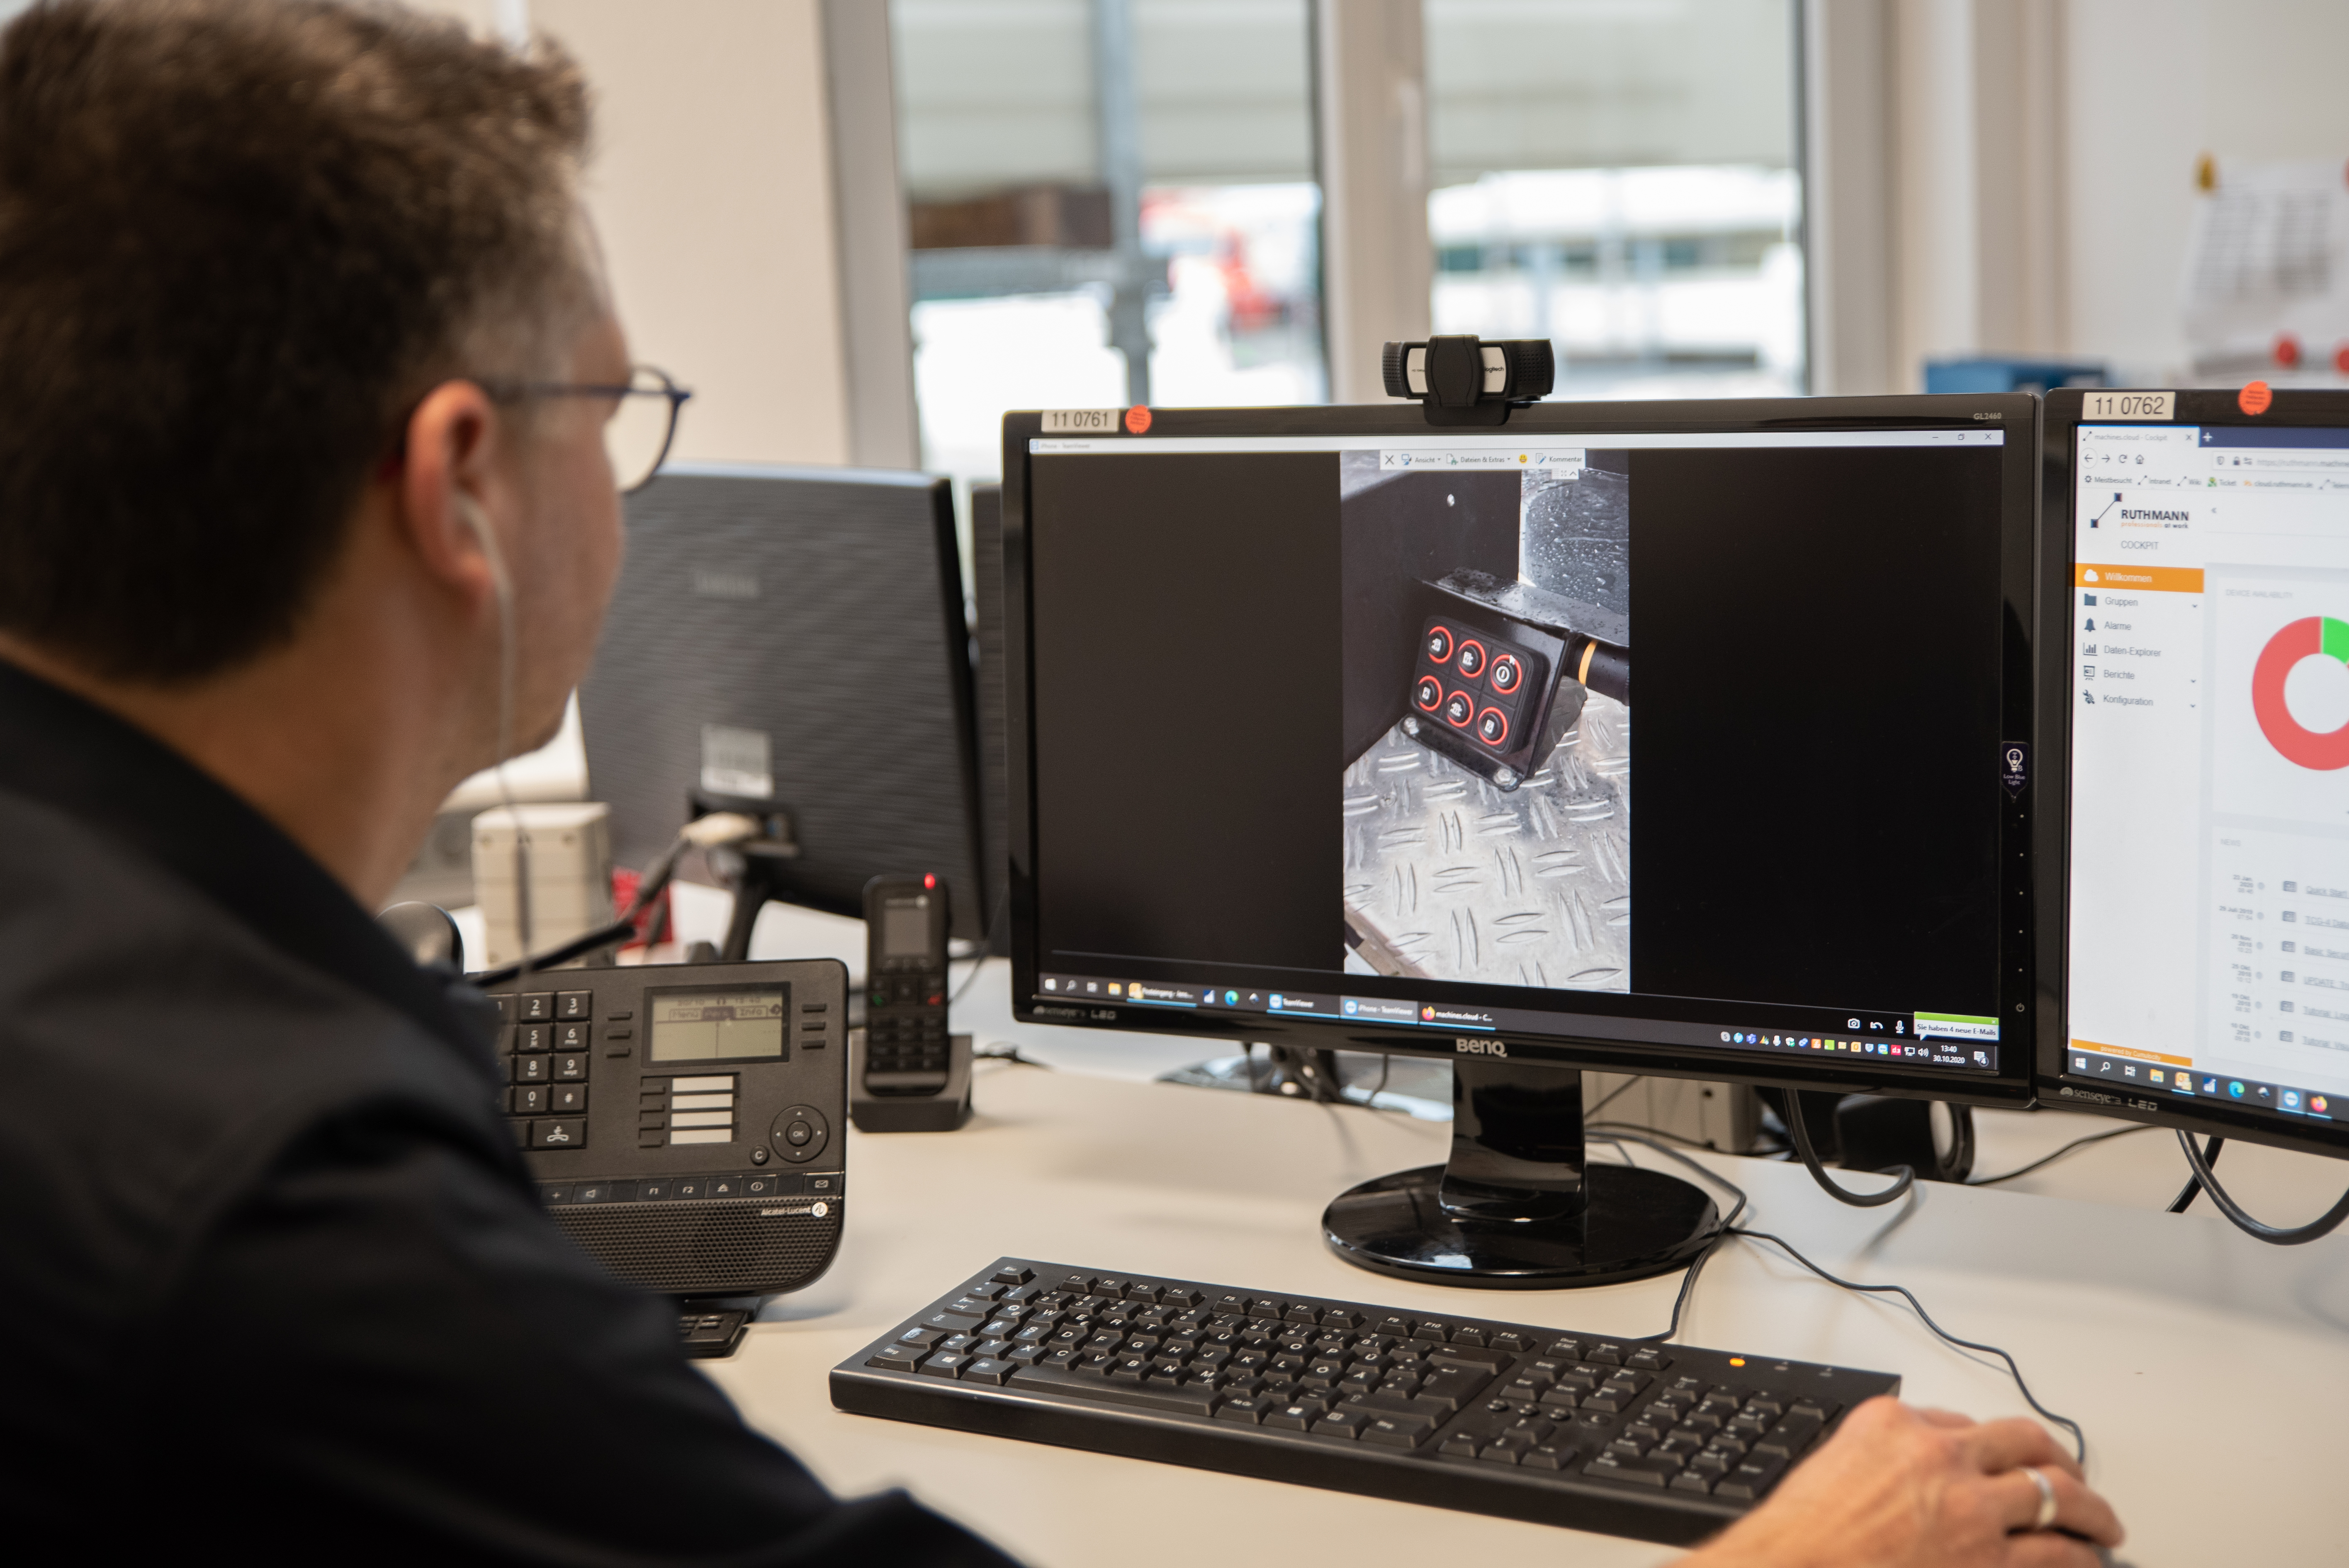 Harden timeren Smelte Ruthmann relies on camera-supported service with TeamViewer Pilot | RUTHMANN